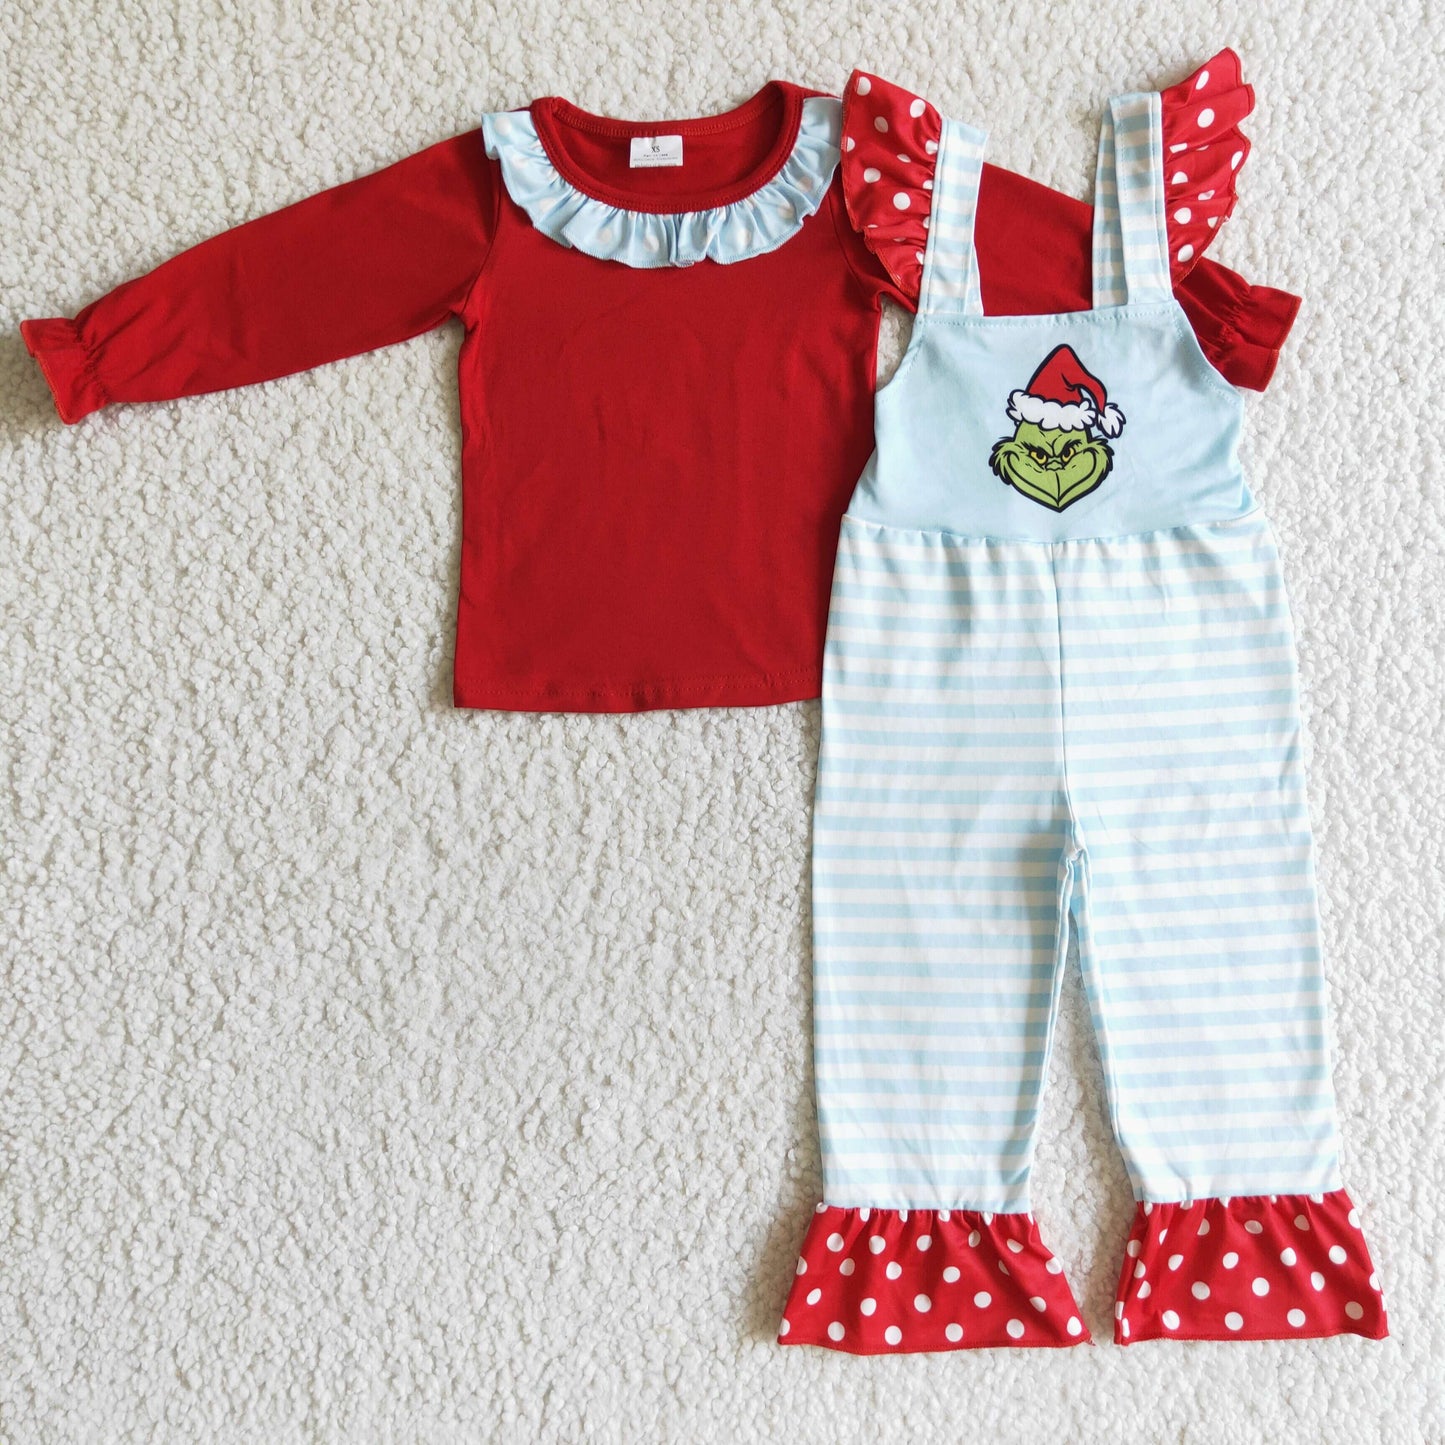 Baby girls long sleeve top Christmas suspender outfit